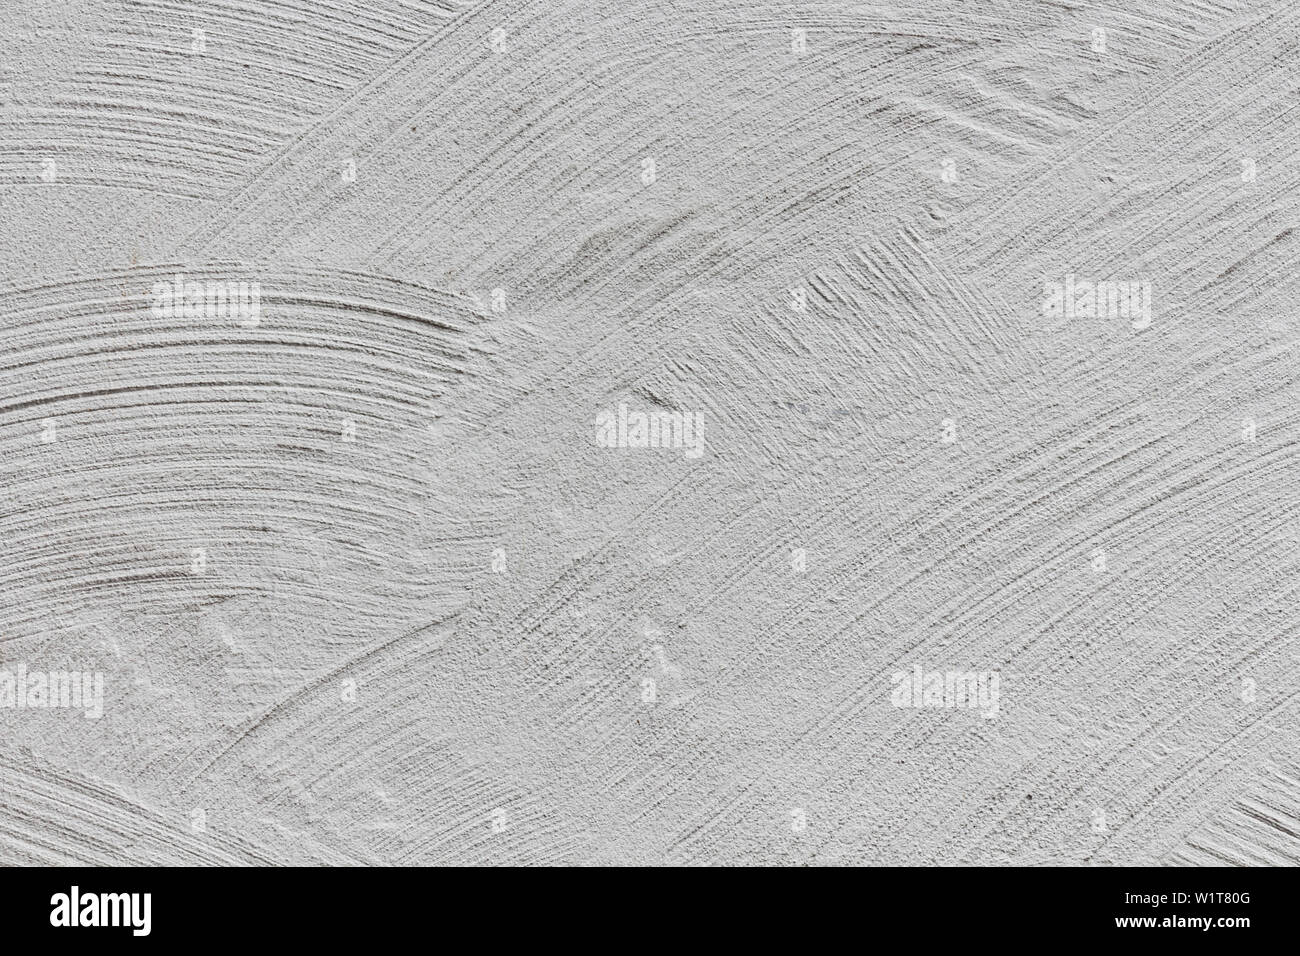 White Putty Wall With Brush Strokes Texture Putty Brush On The Wall Stock Photo Alamy